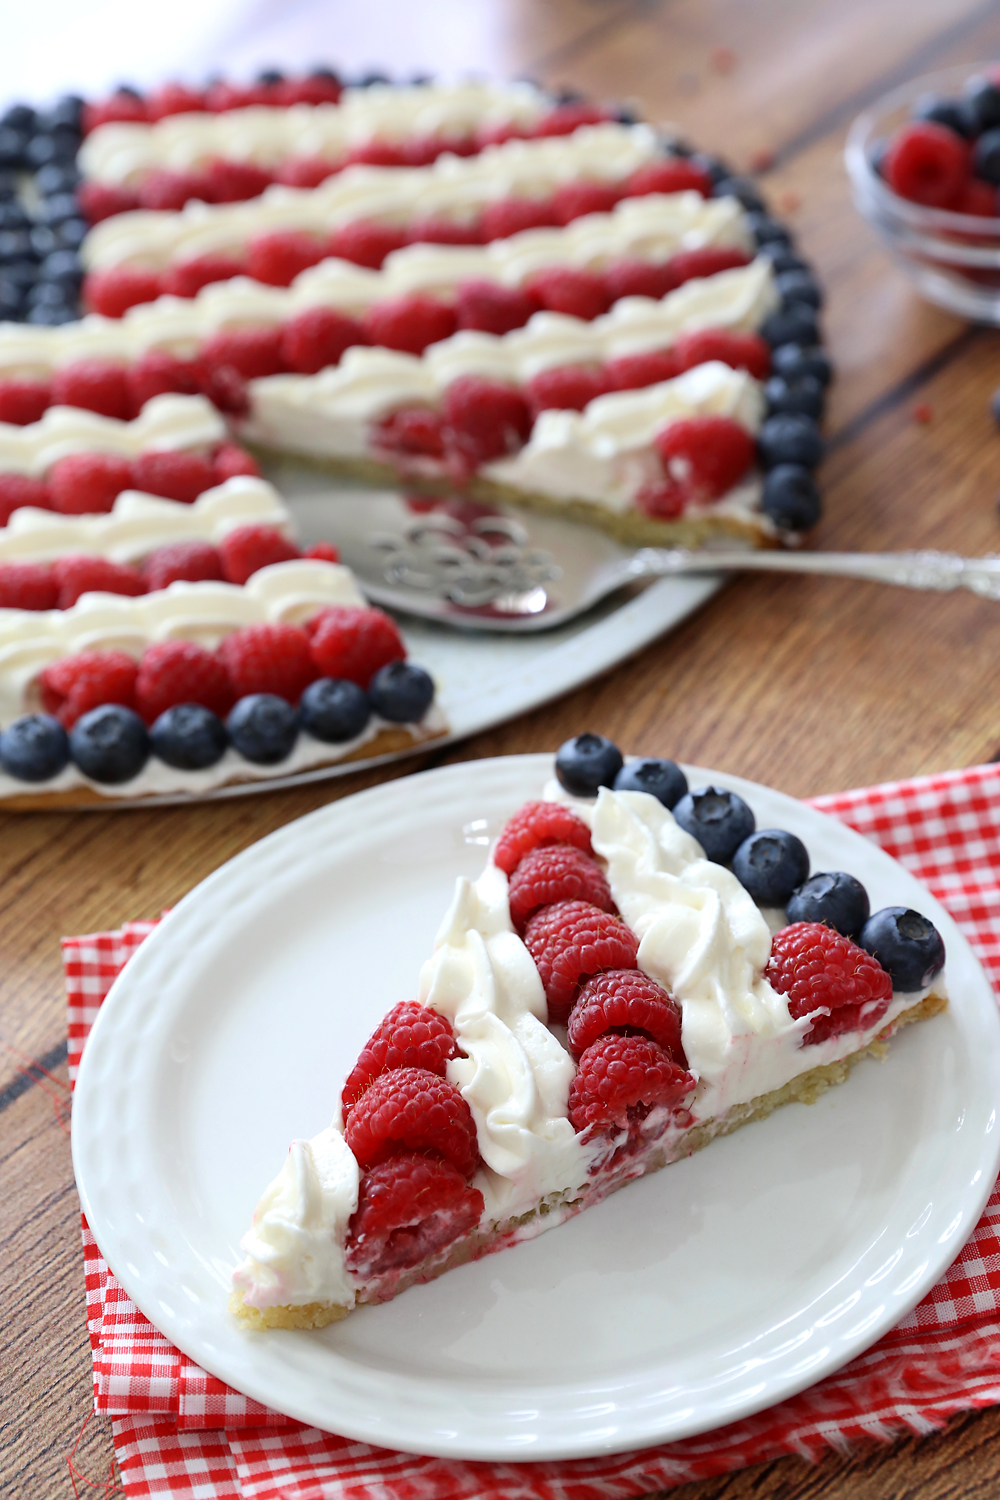 A slice of fruit pizza decorated with raspberries, blueberries, and cream to look like an American flag